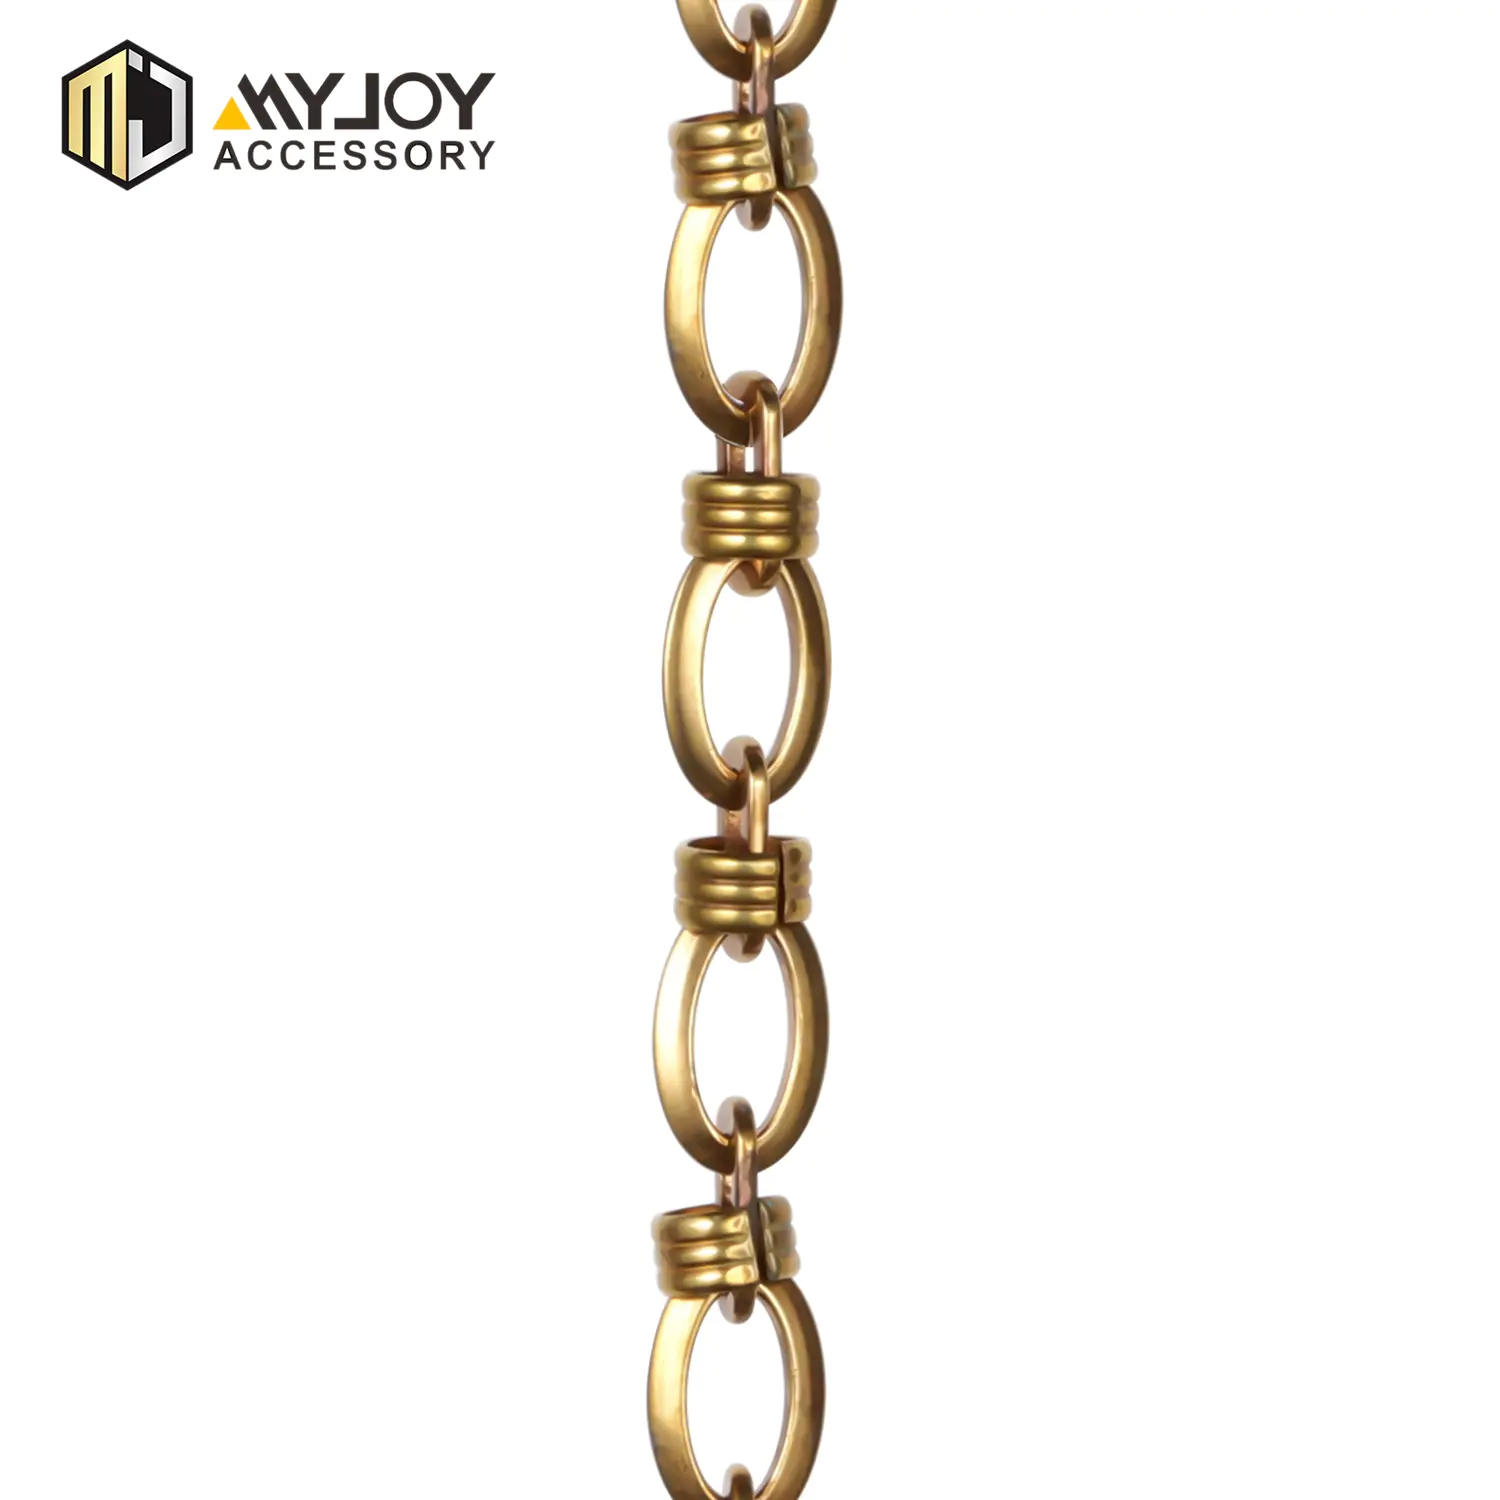 MYJOY color handbag chain strap for business for bags